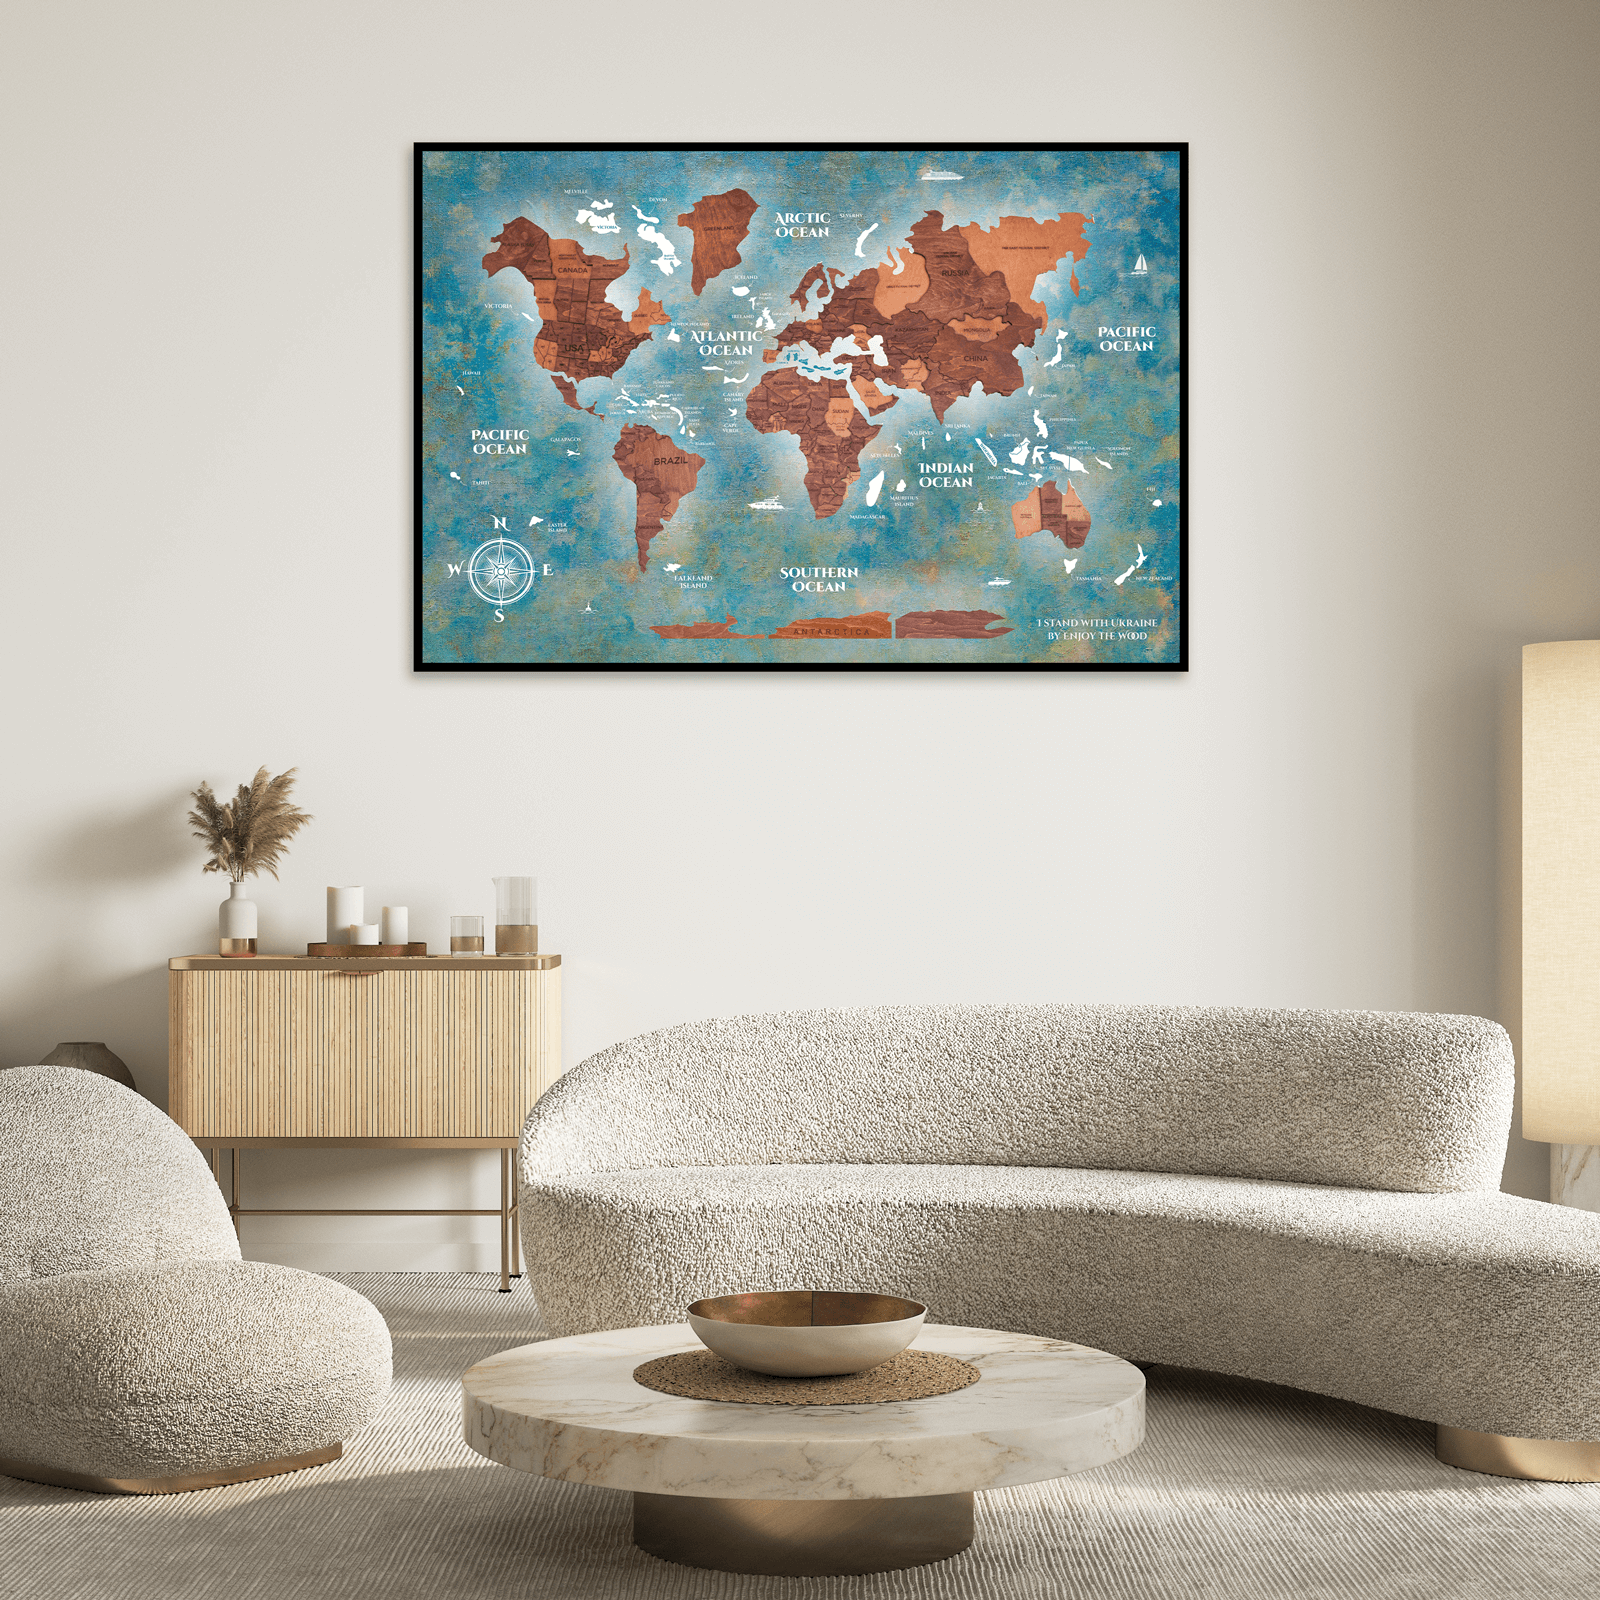 Travel, Learn and Explore With These Wooden World Maps by Enjoy The Wood